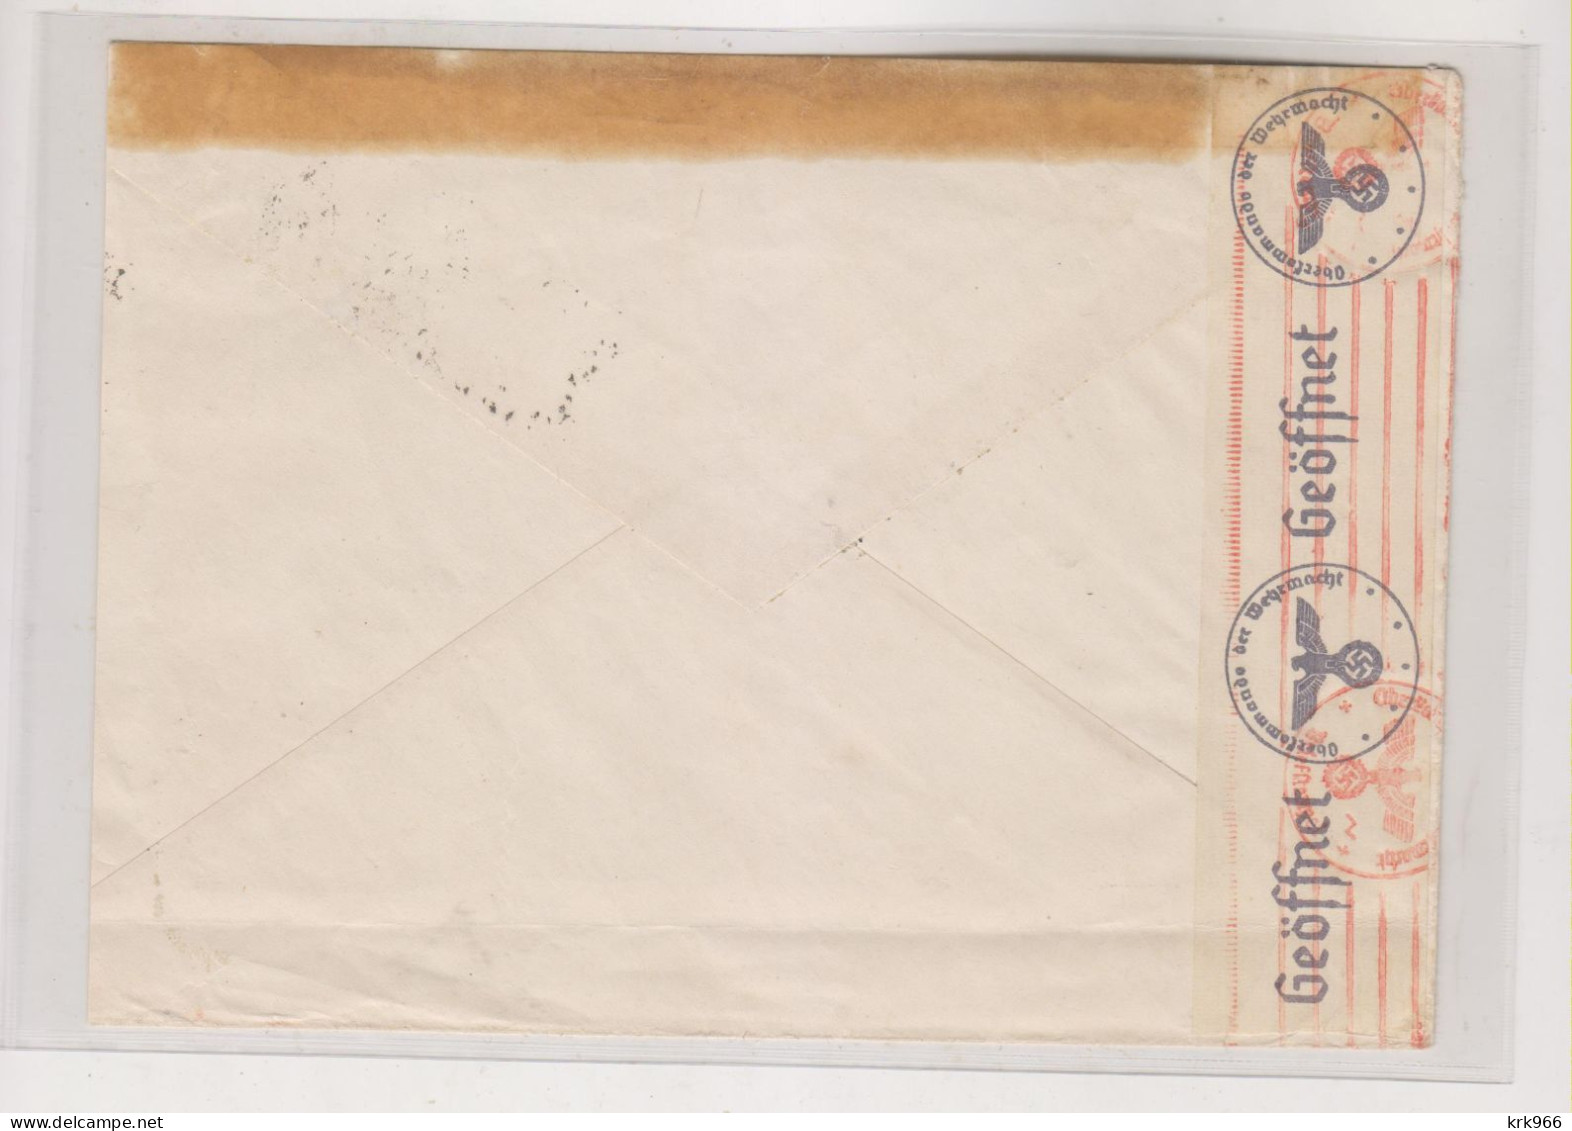 RUSSIA,  1940 LENINGRAD Censored Cover To WIEN Austria Germany - Covers & Documents